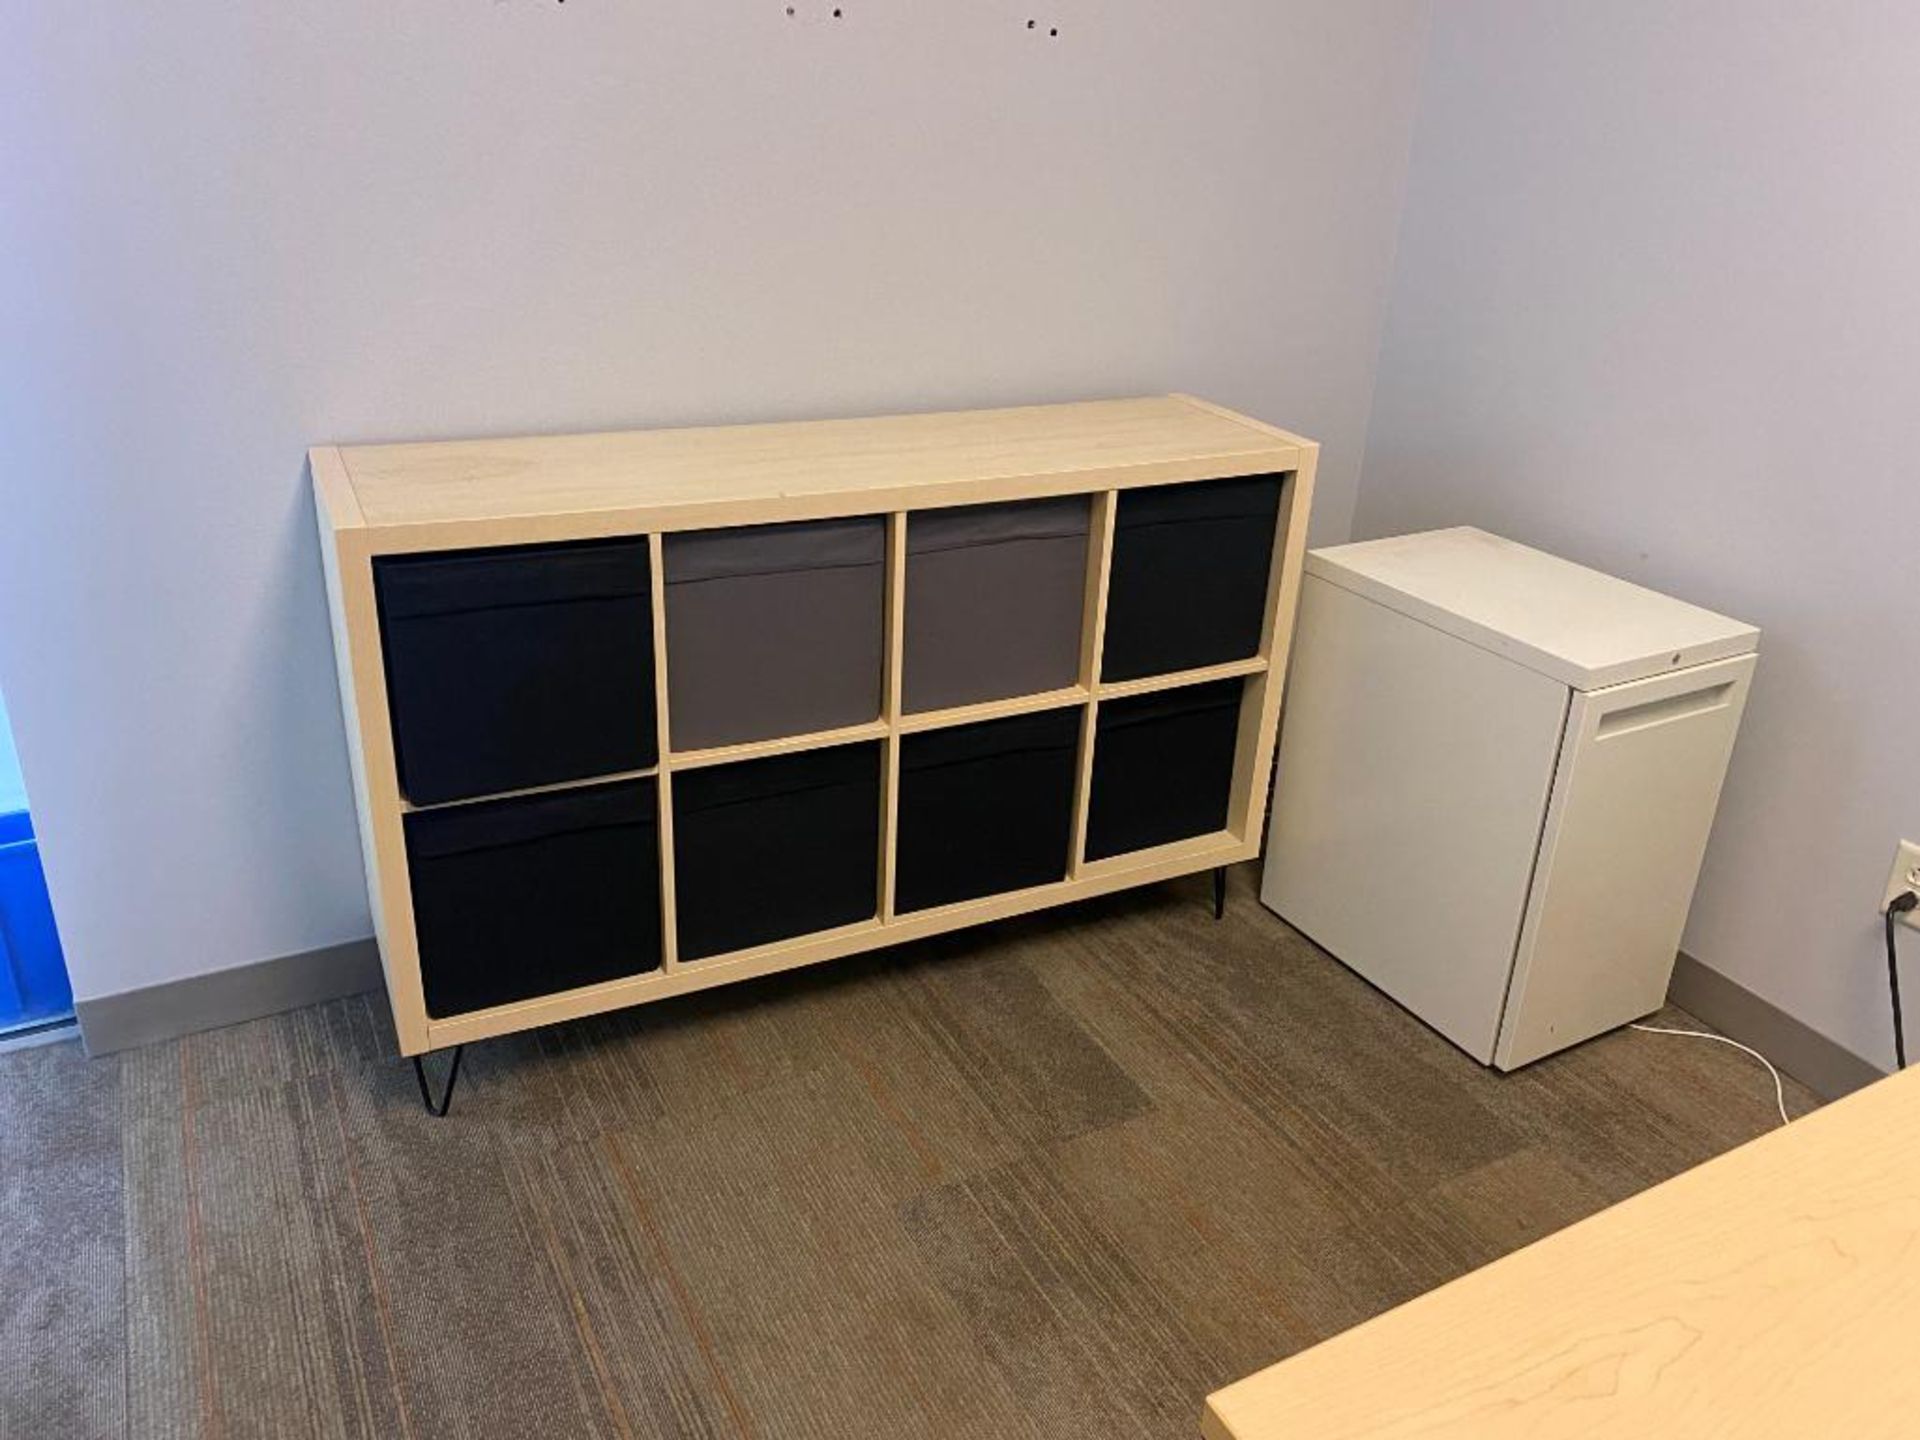 Content of Office: Desk & Cabinets - Image 2 of 2